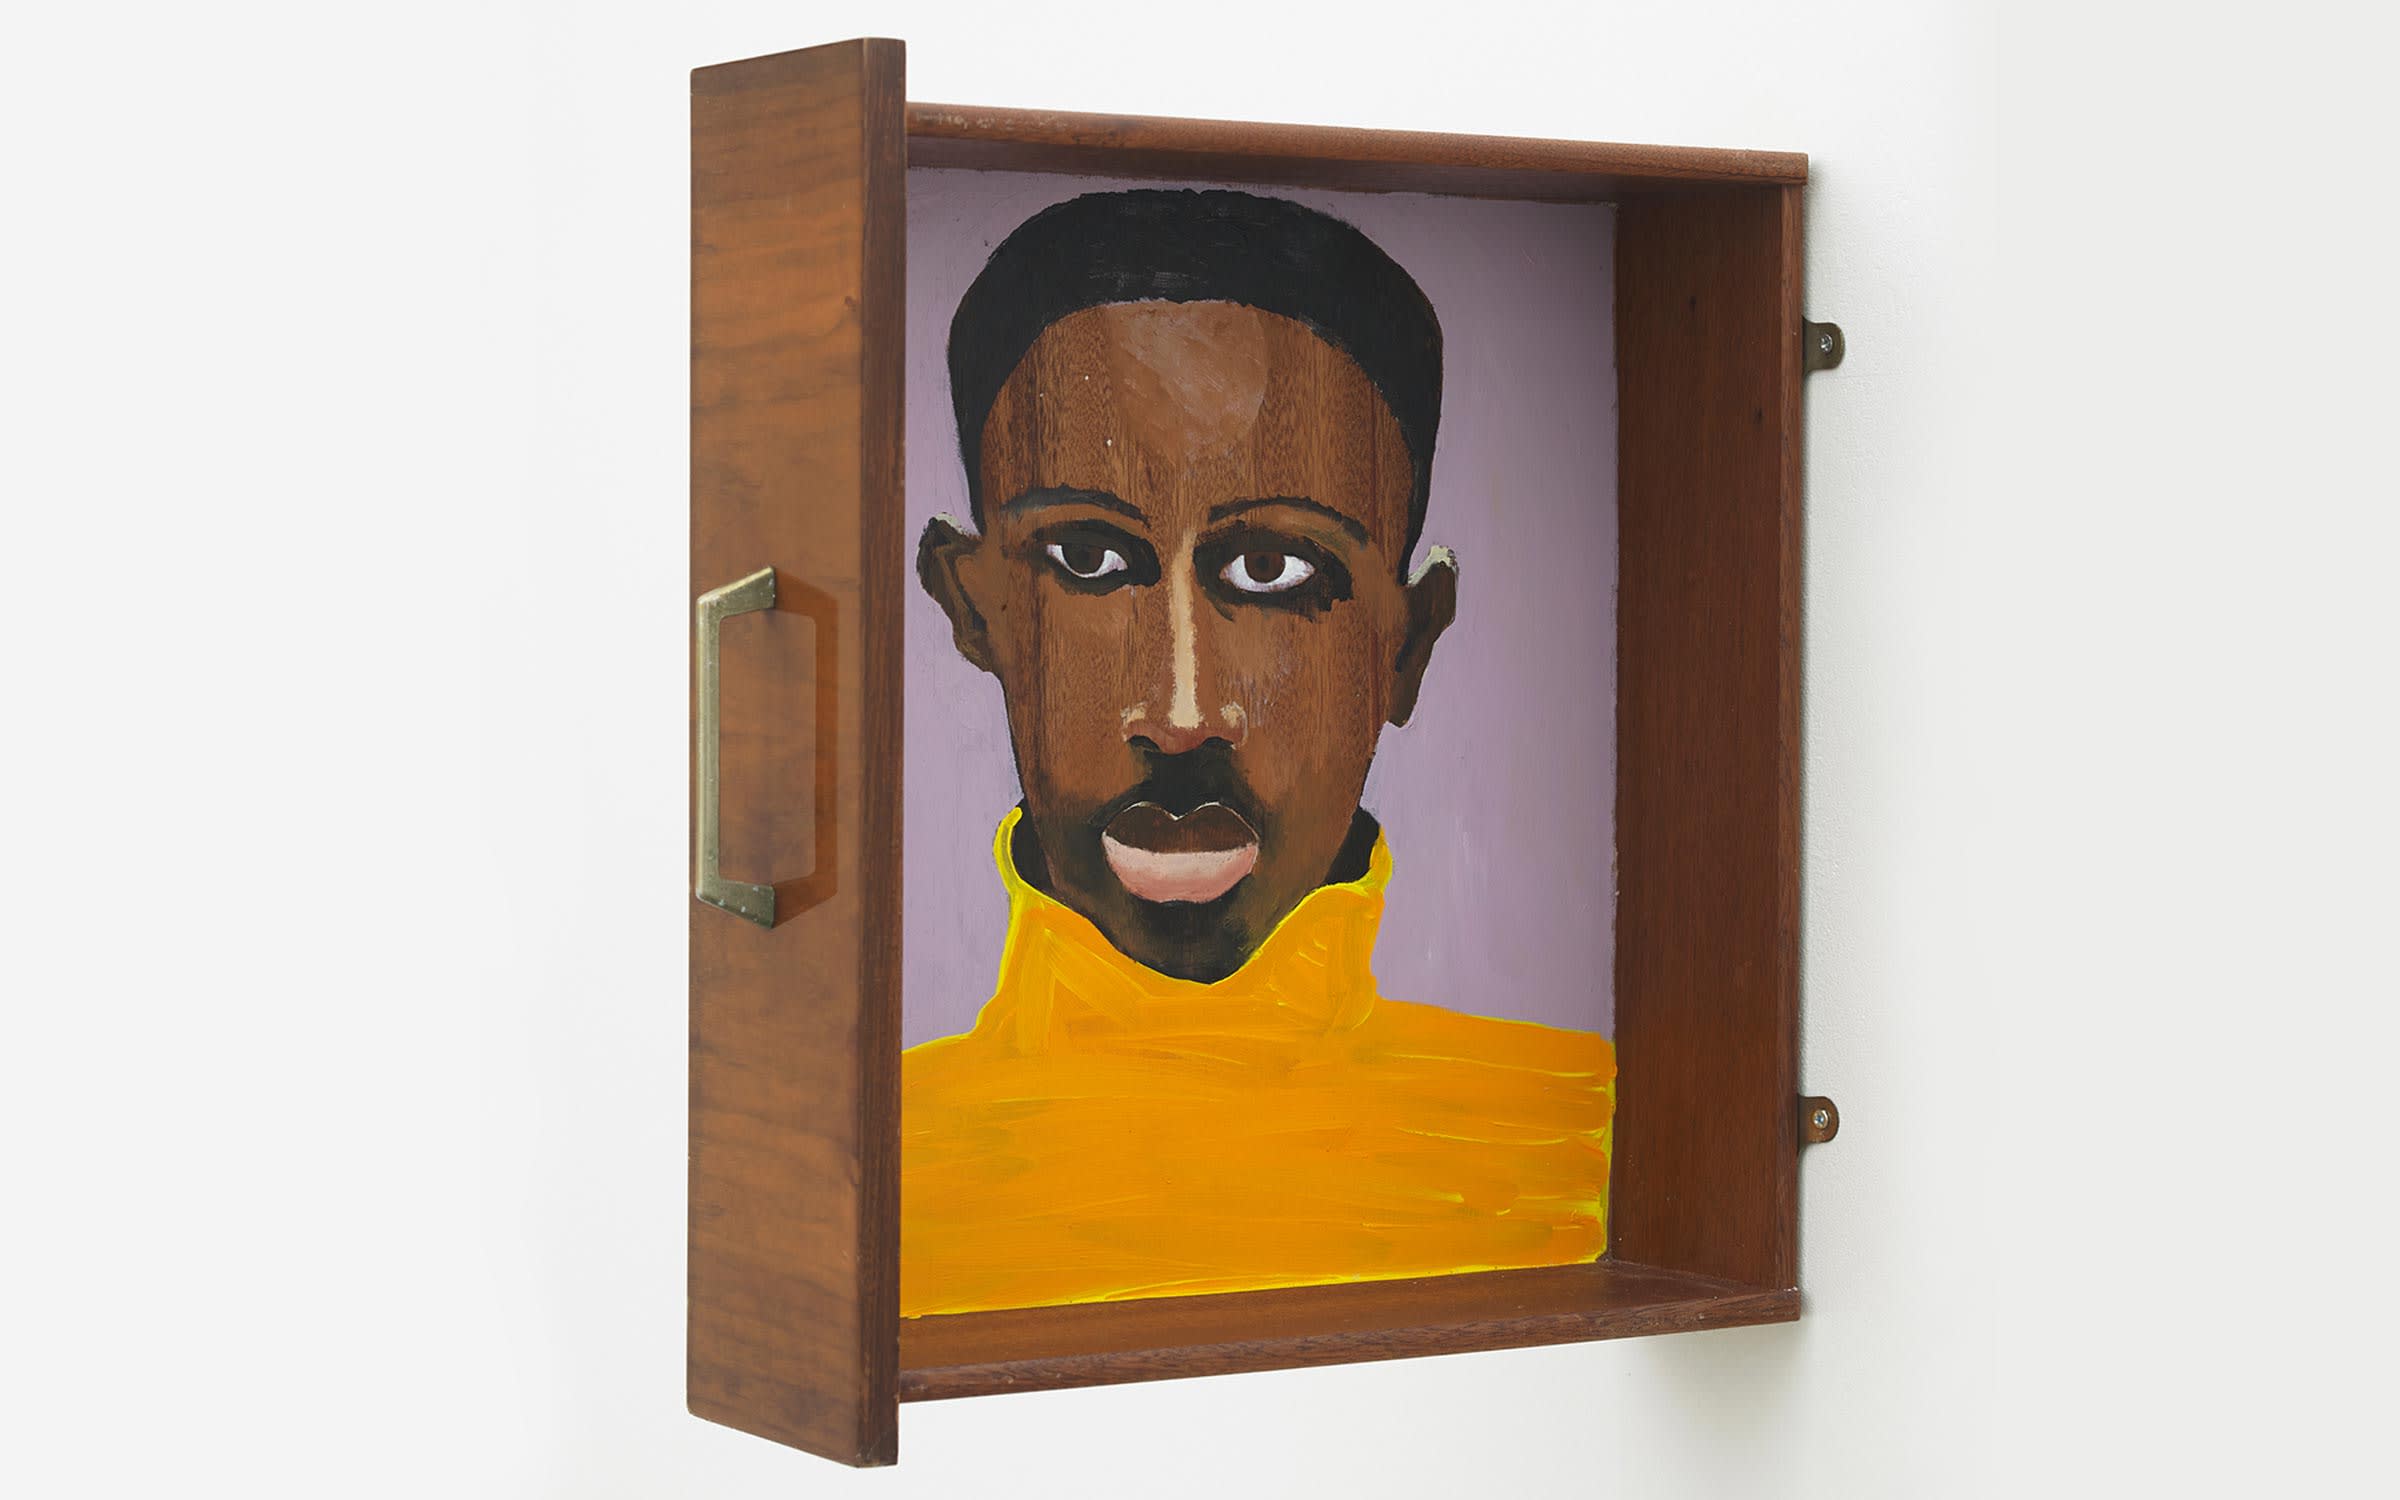 Lubaina Himid, Man in a Jumper Drawer, 2018. Courtesy the artist and Hollybush Gardens.